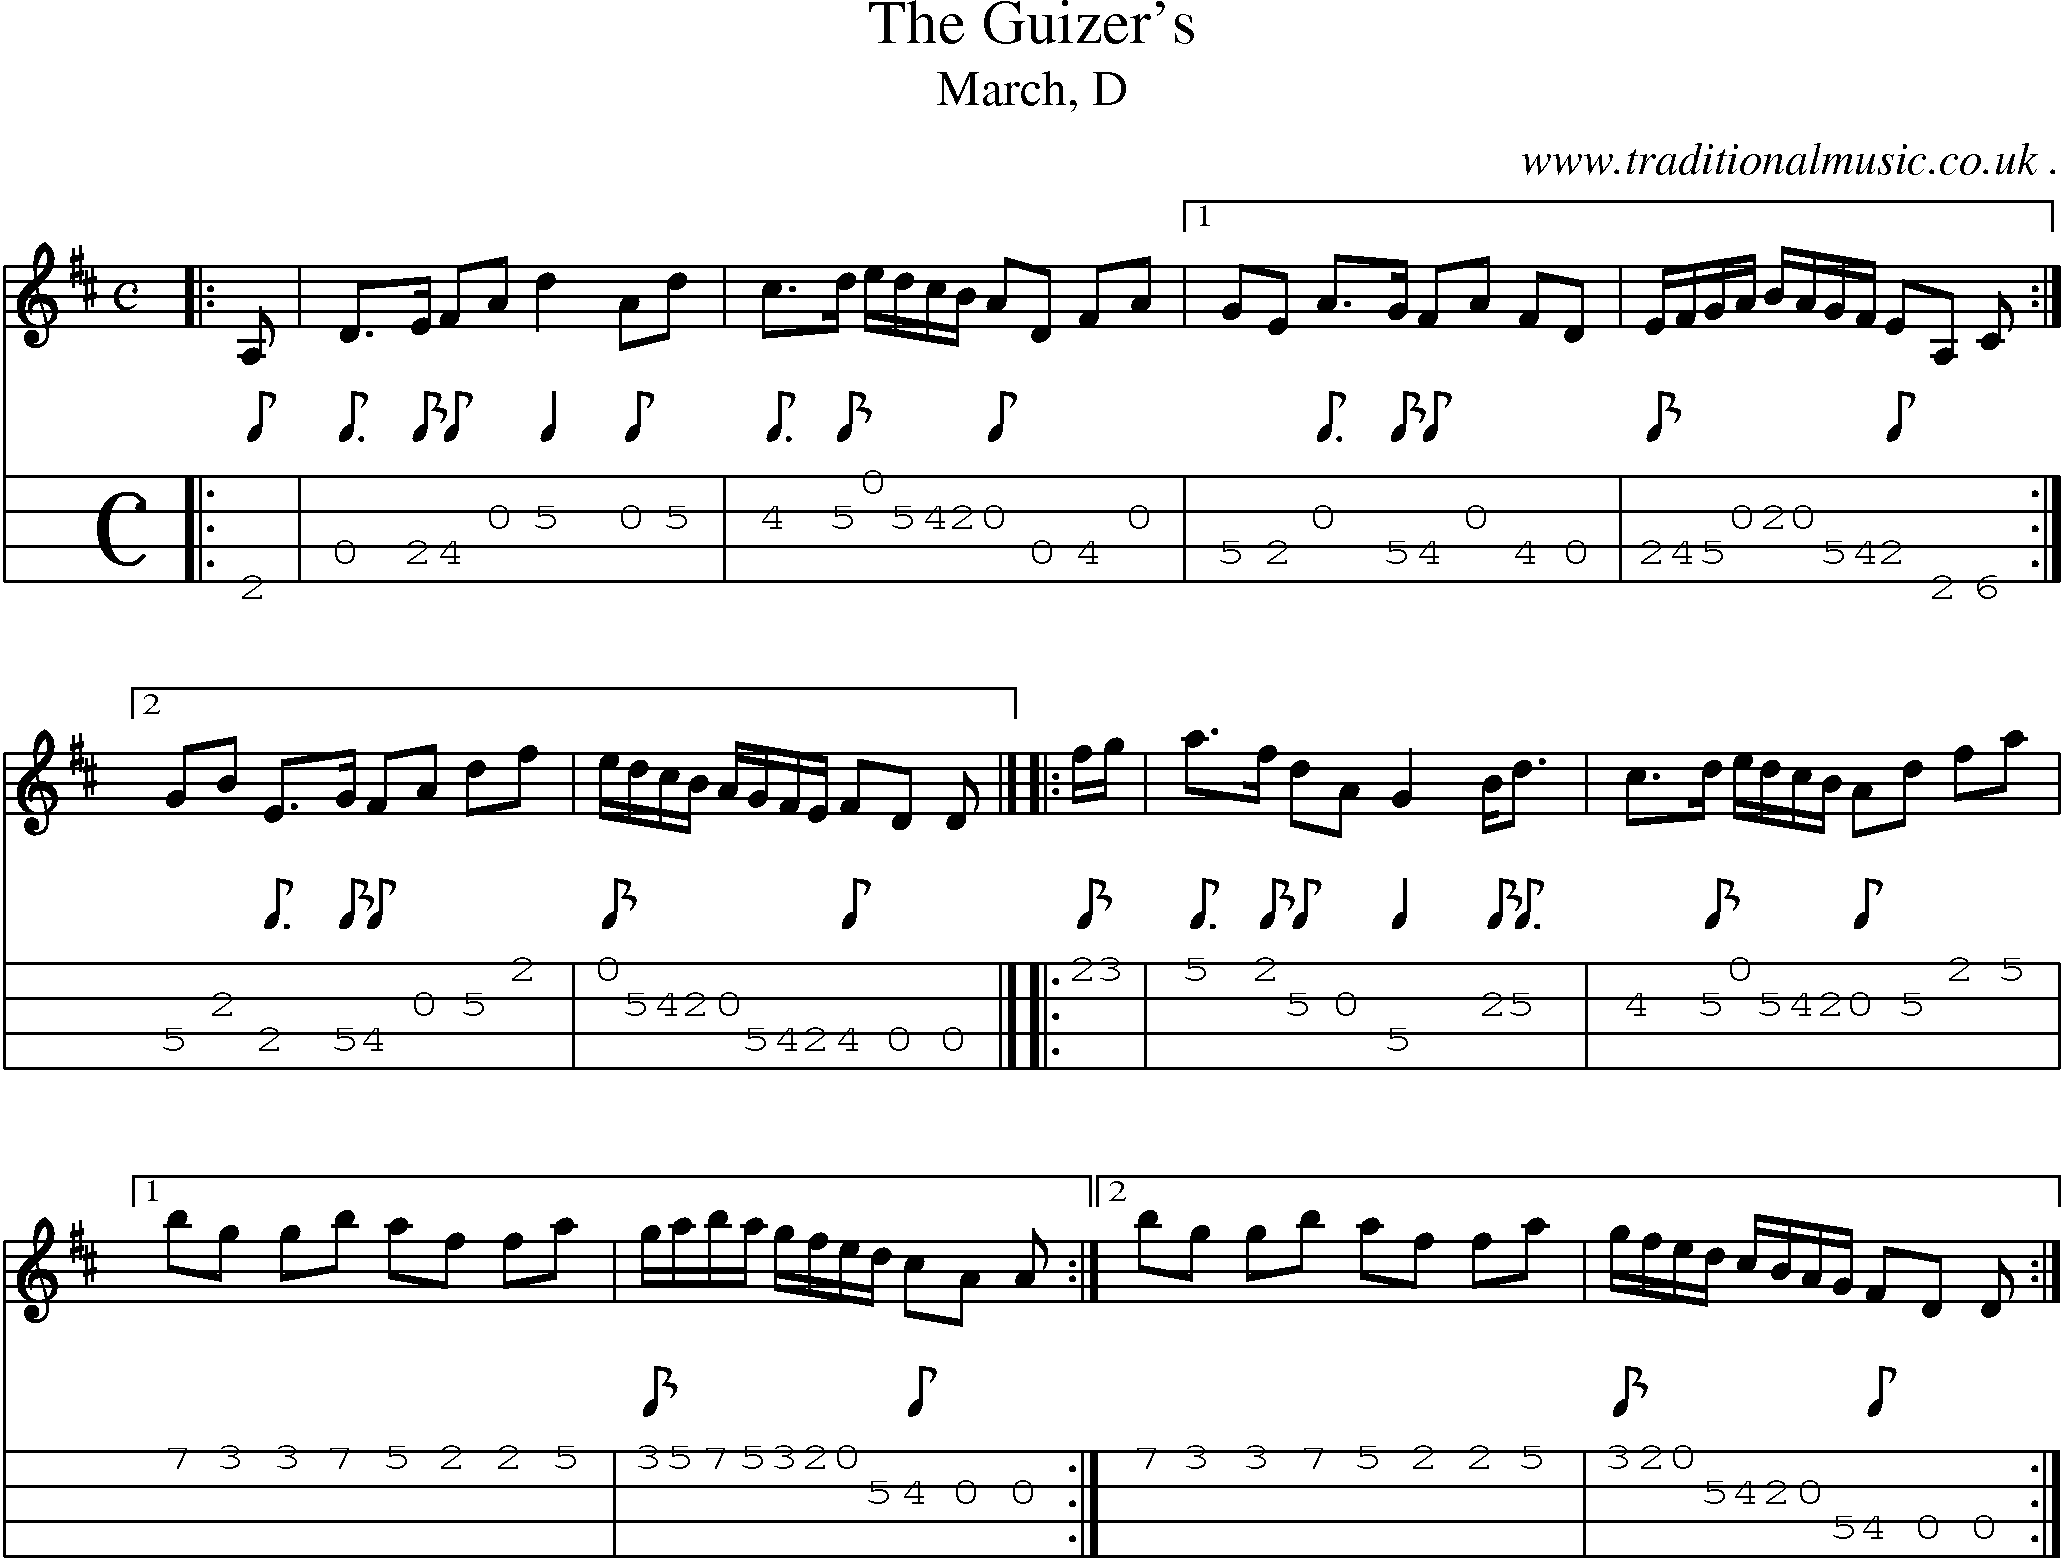 Sheet-music  score, Chords and Mandolin Tabs for The Guizers